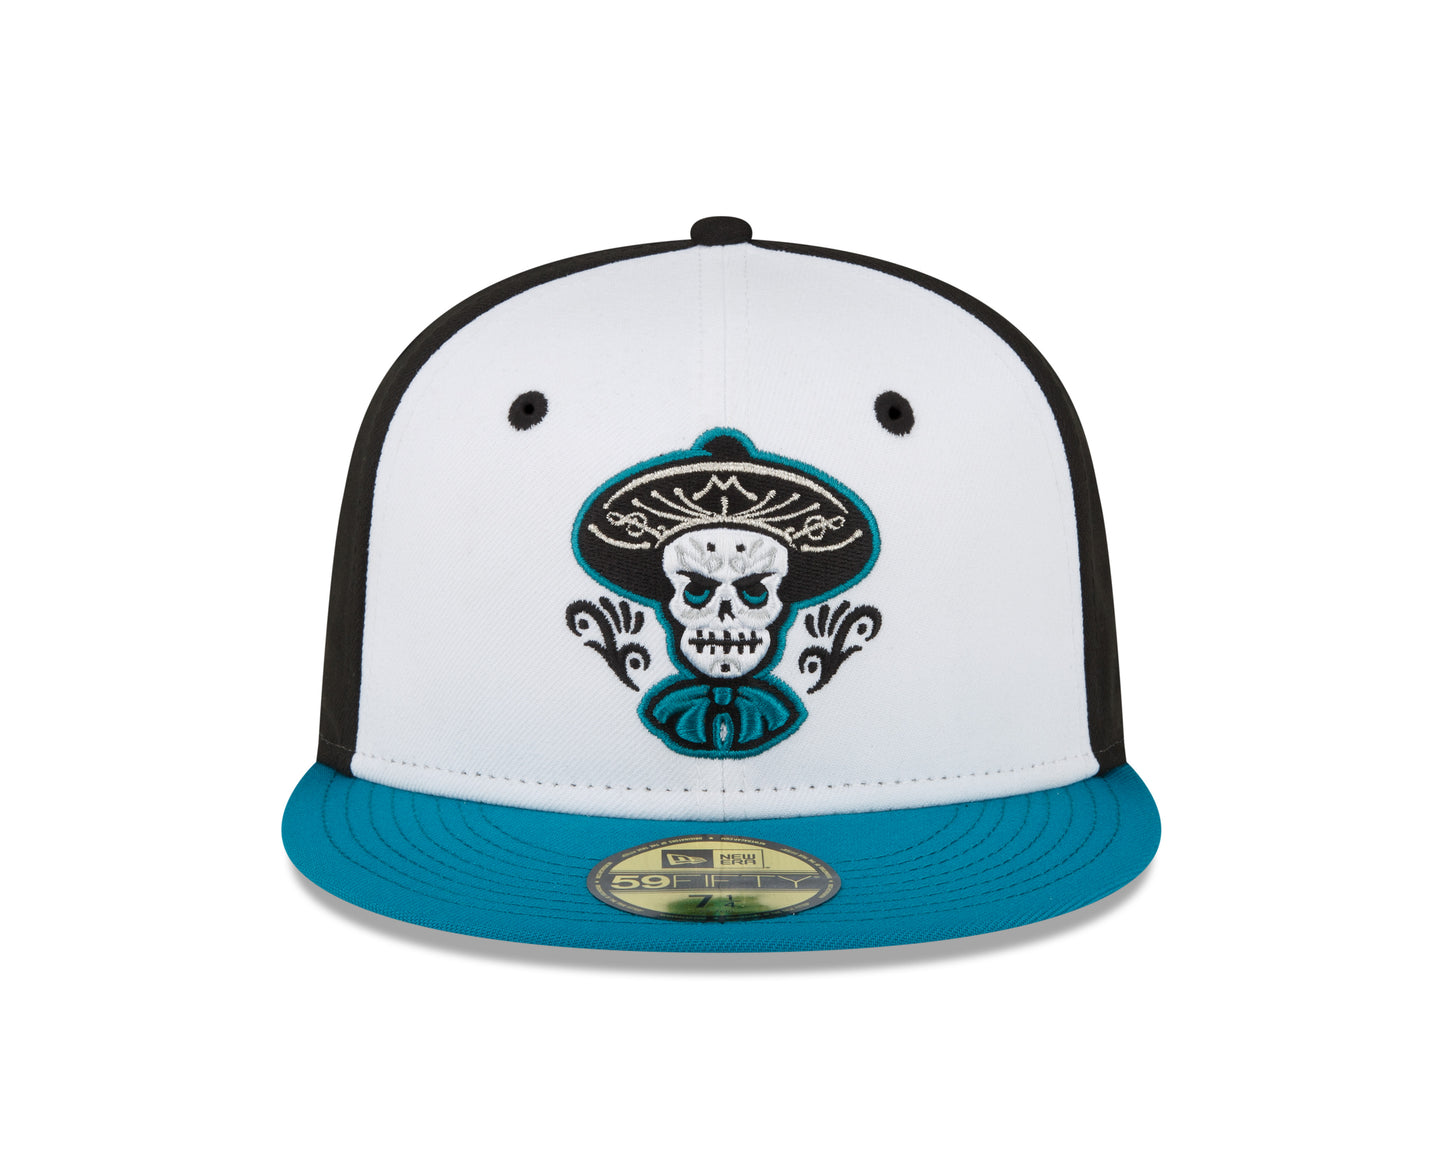 New Era - 59fifty Fitted - MiLB - COPA - Albuquerque Isotopes - White/Black/Teal - Headz Up 